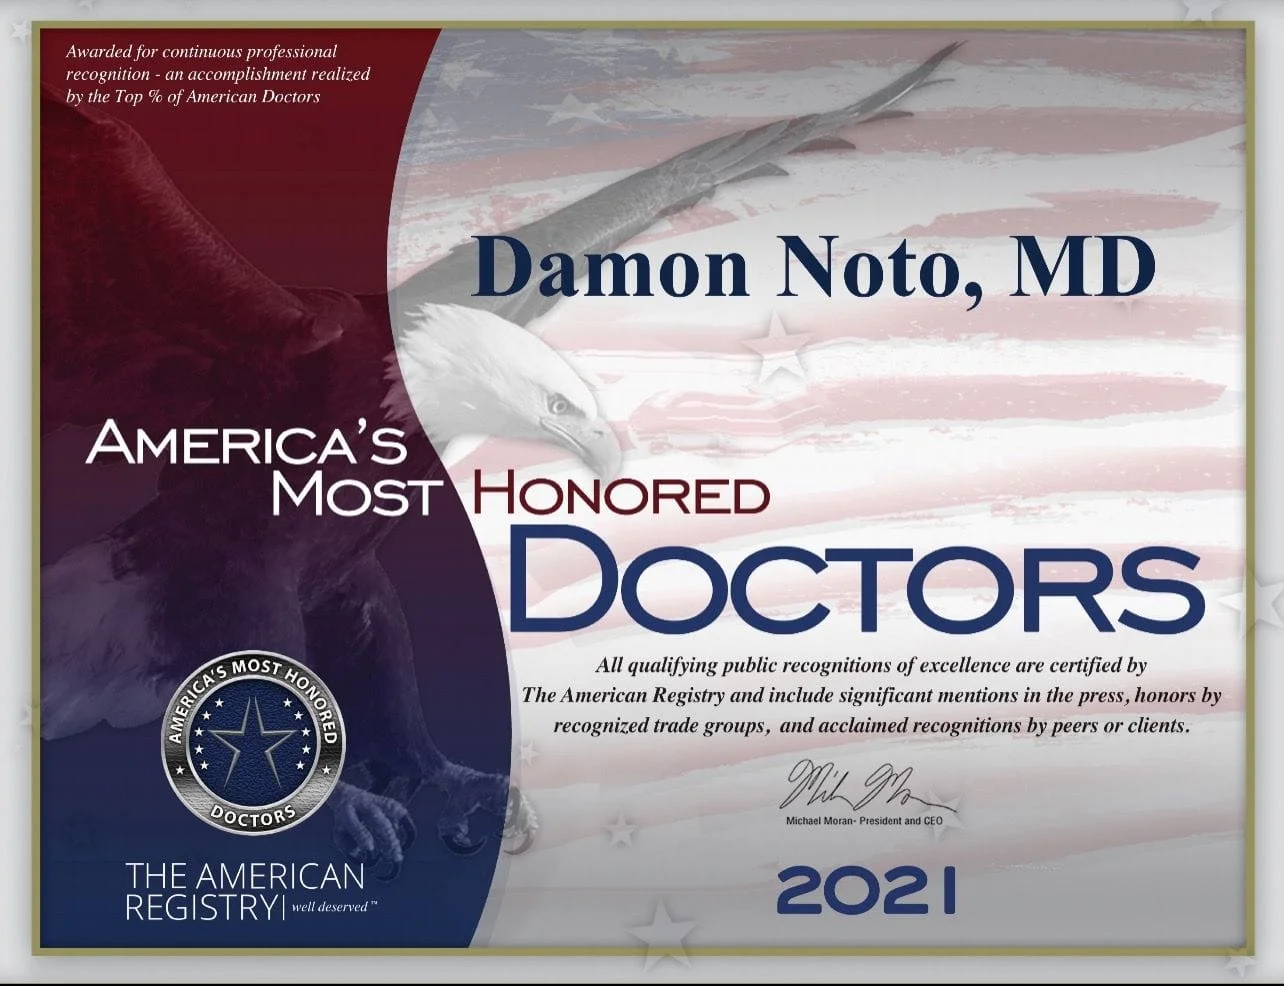 America's Most Honored Doctors, 2021